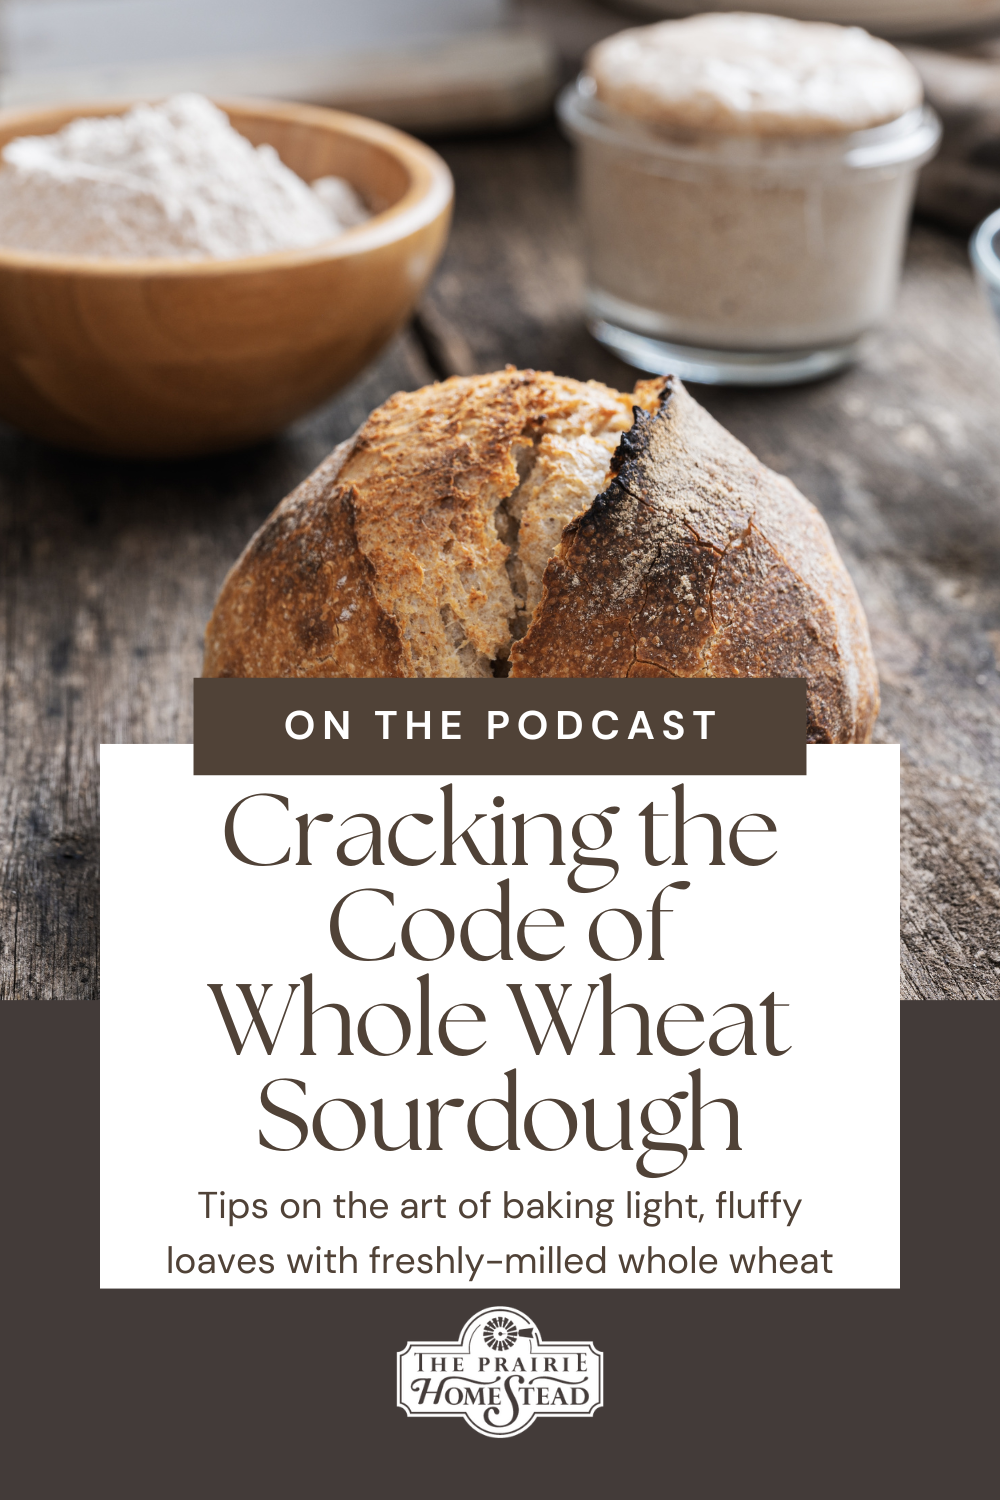 Cracking the Code of Whole Wheat Sourdough